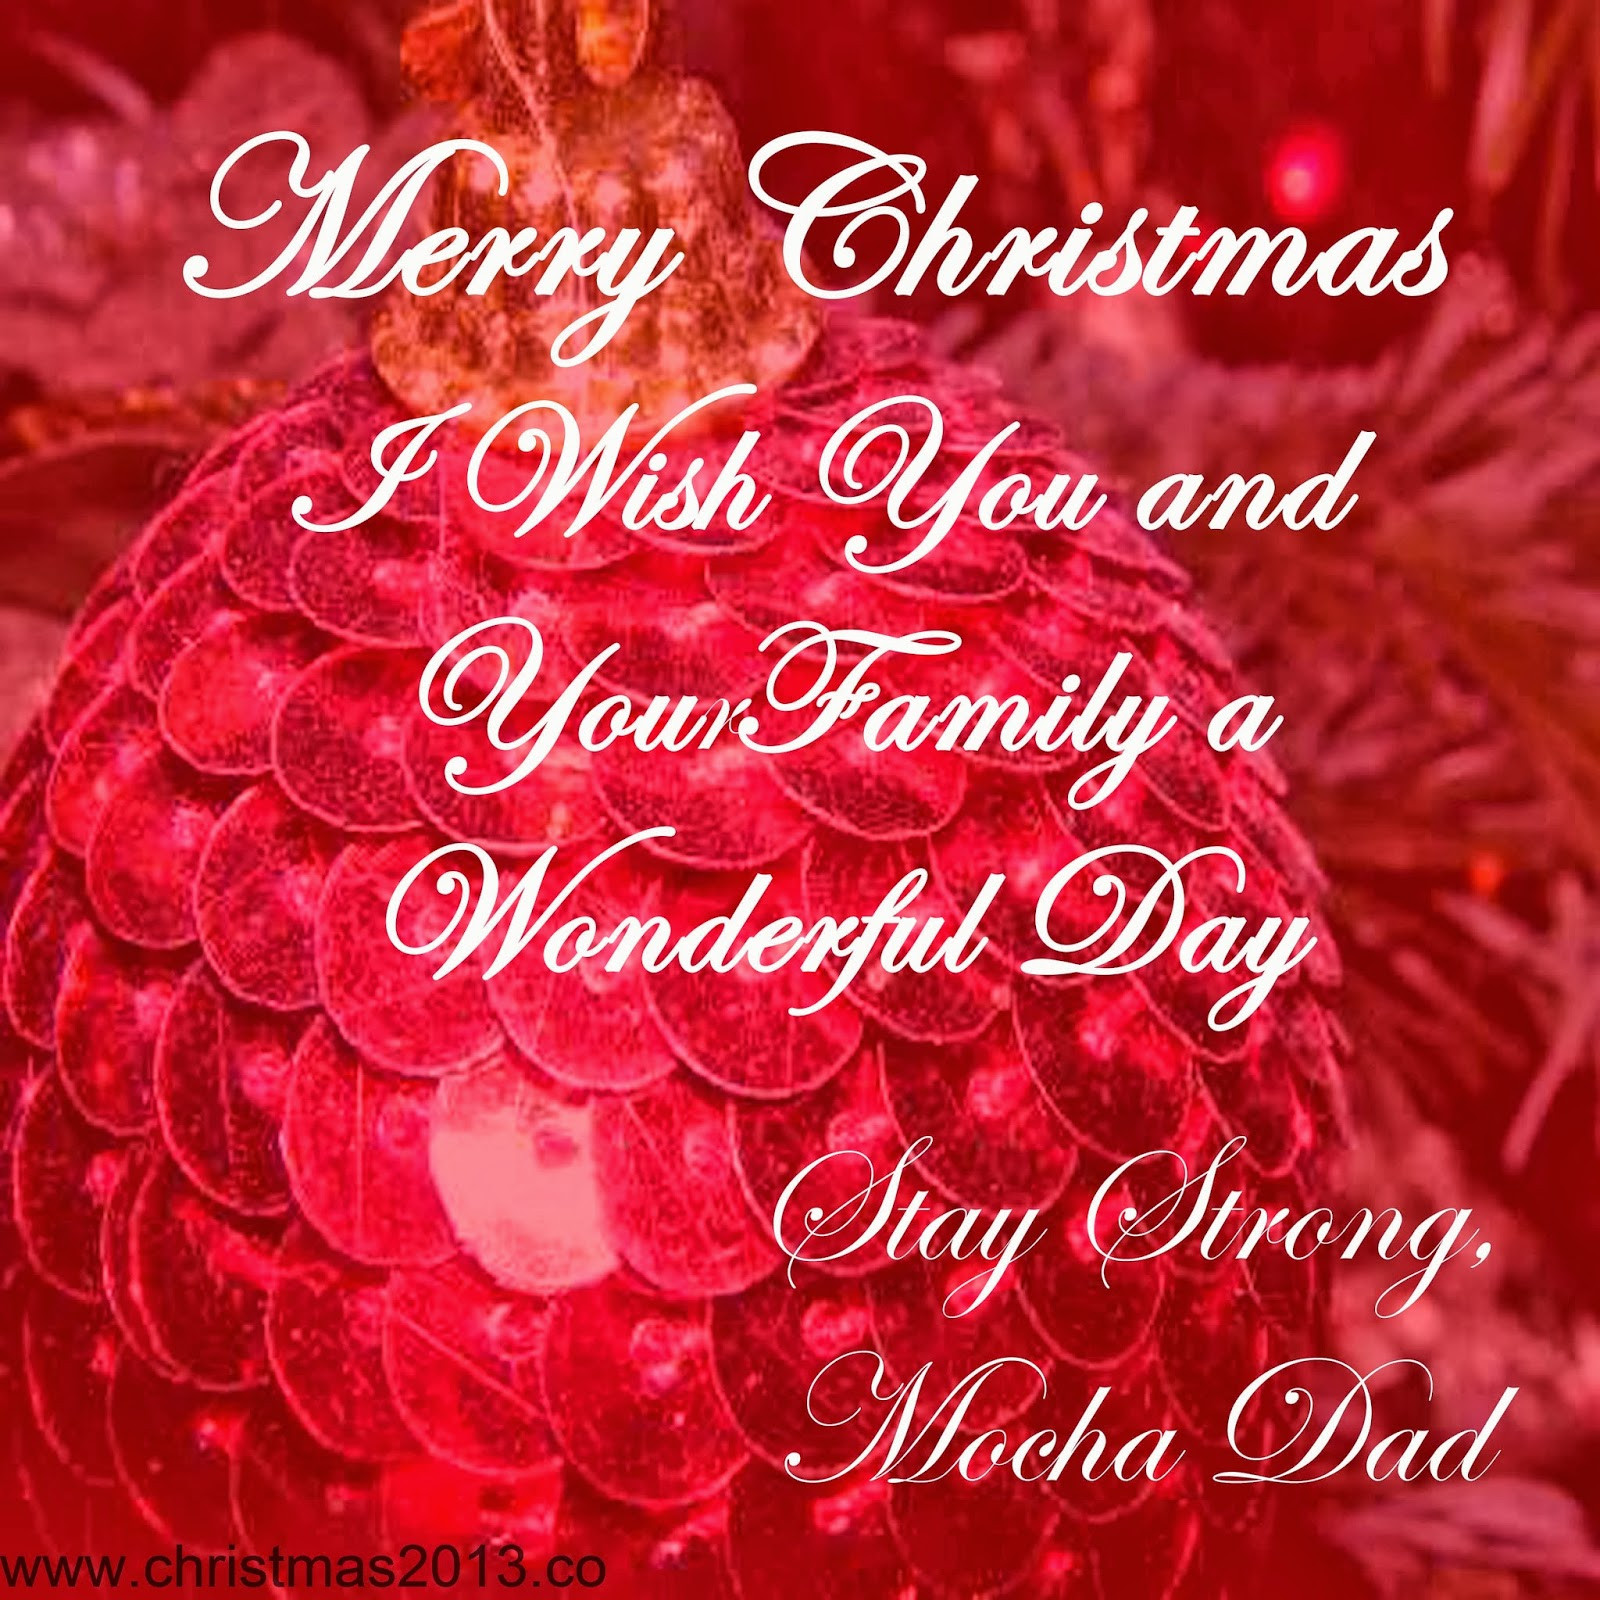 Merry Christmas Everyone Quote
 Quotes Sayings Merry Christmas Eve QuotesGram